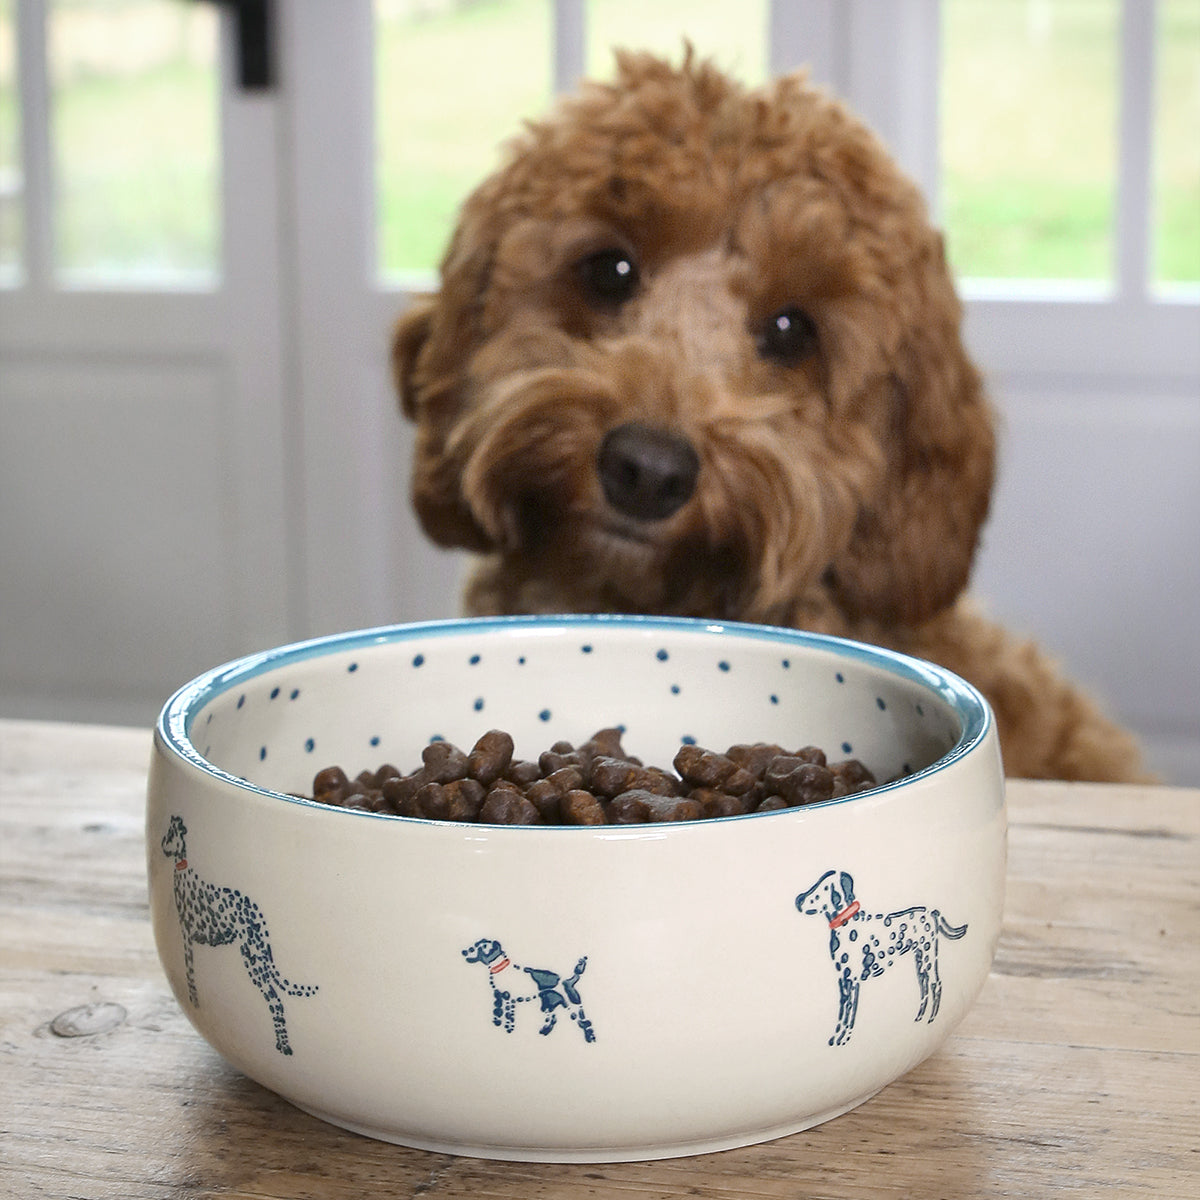 Pet Bowl by Sophie Allport made from Stoneware